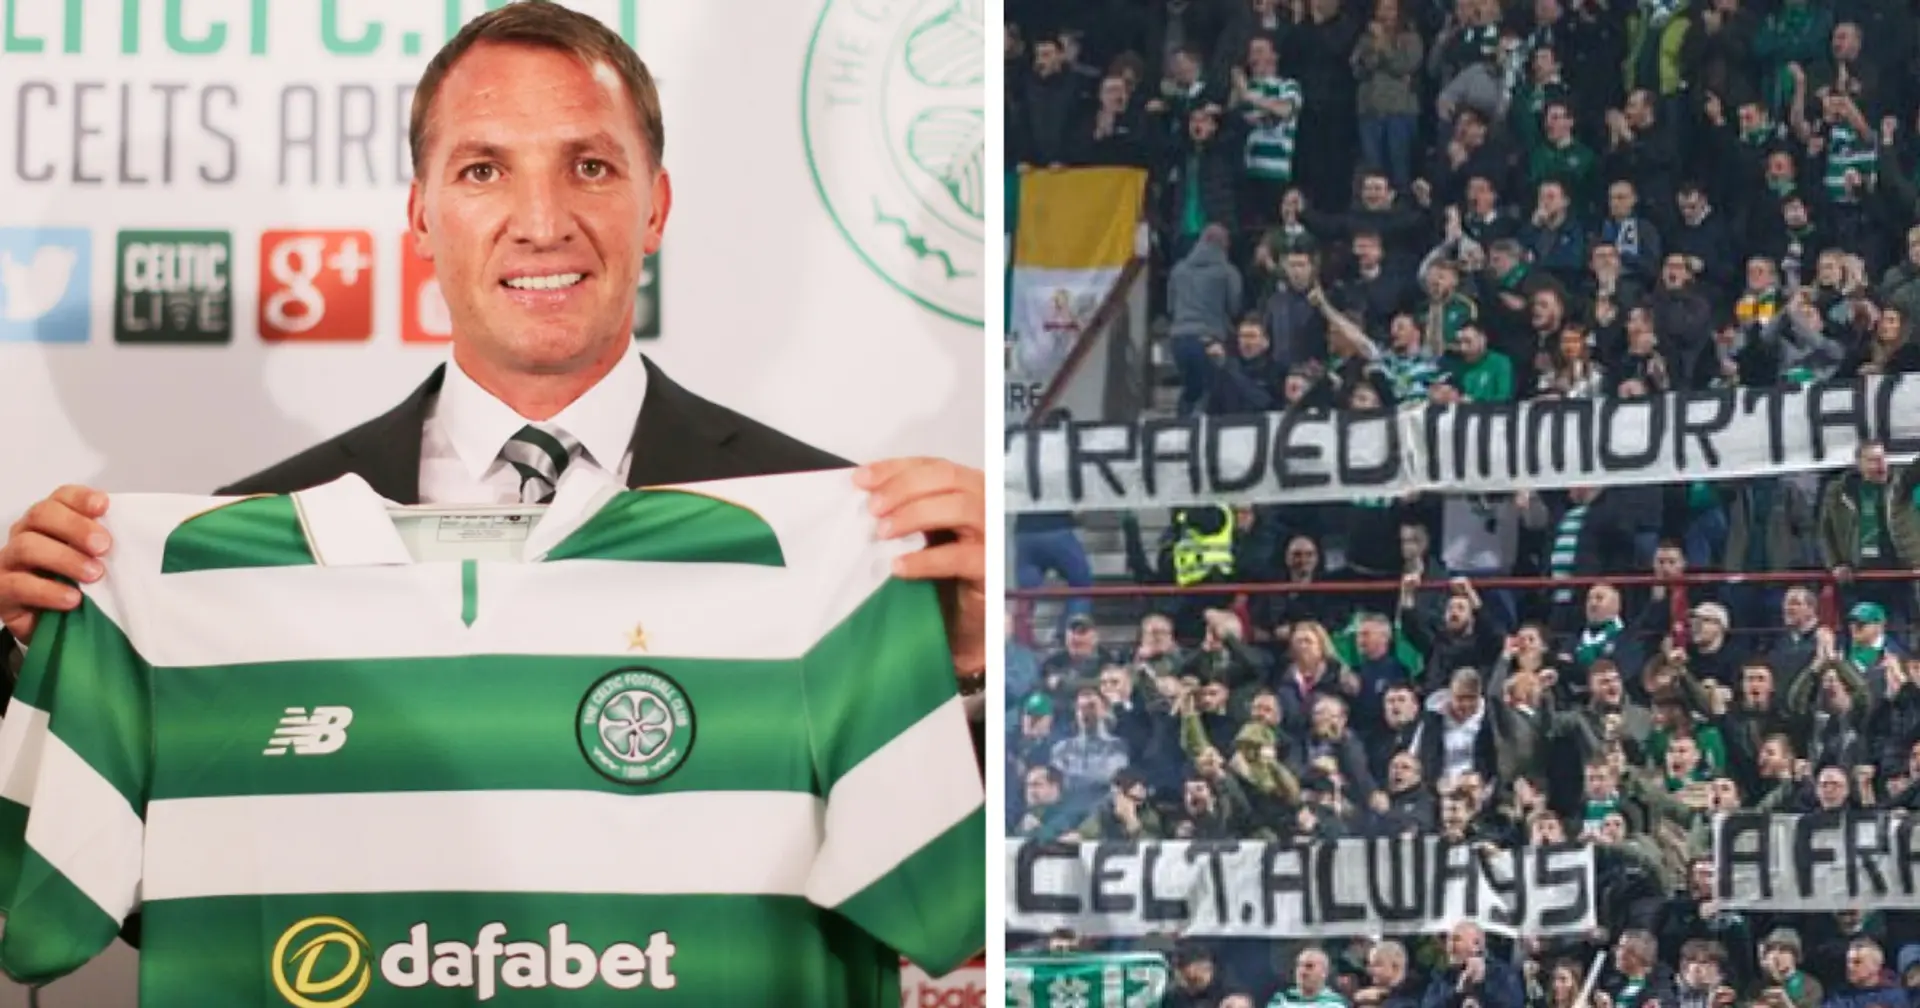 'Never a Celt, always a fraud': Celtic ultras welcome Brendon Rodgers back to the club